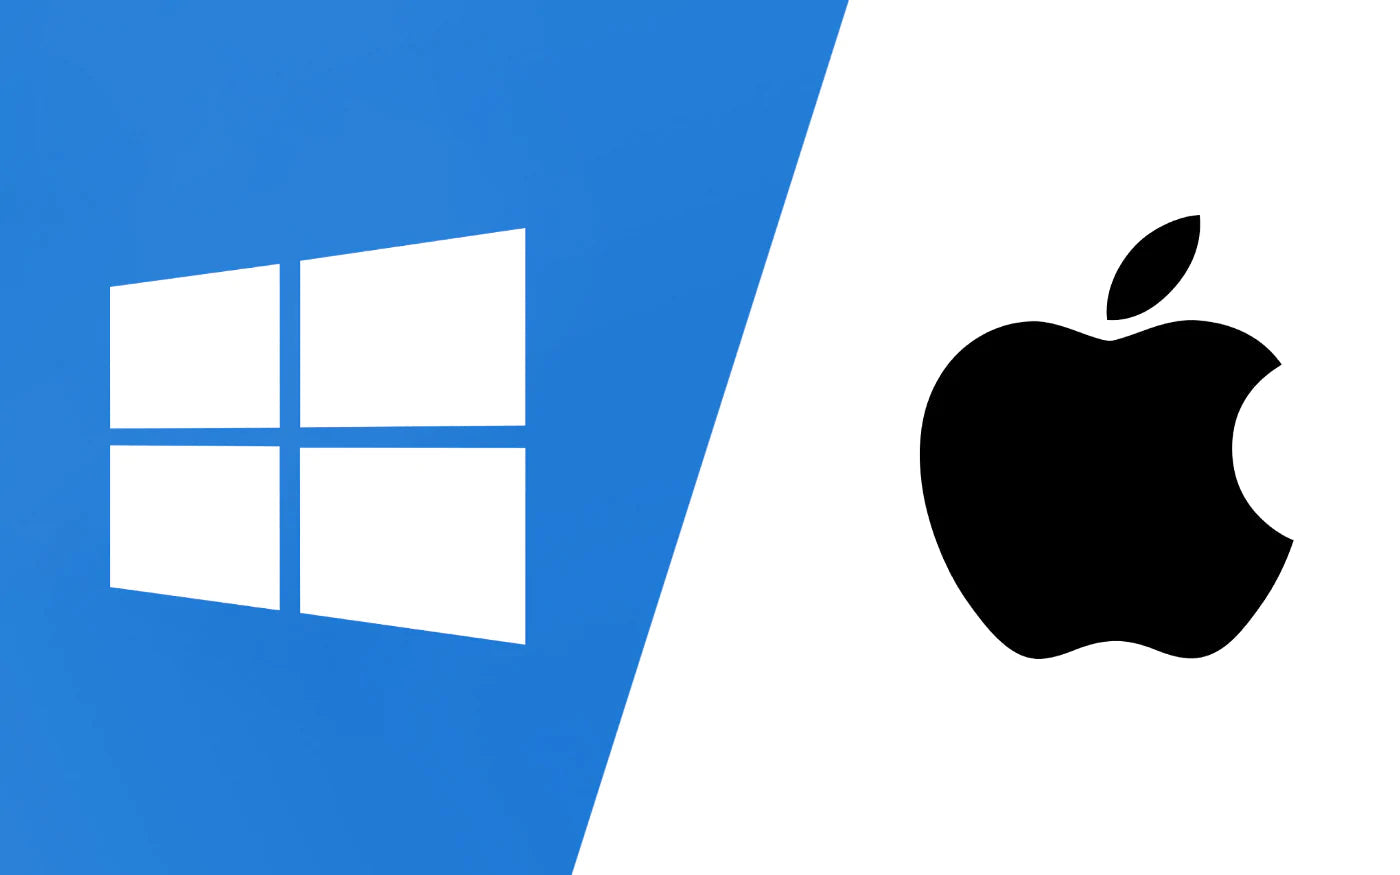 Mac Vs Windows For Programming - Which One Is Better?